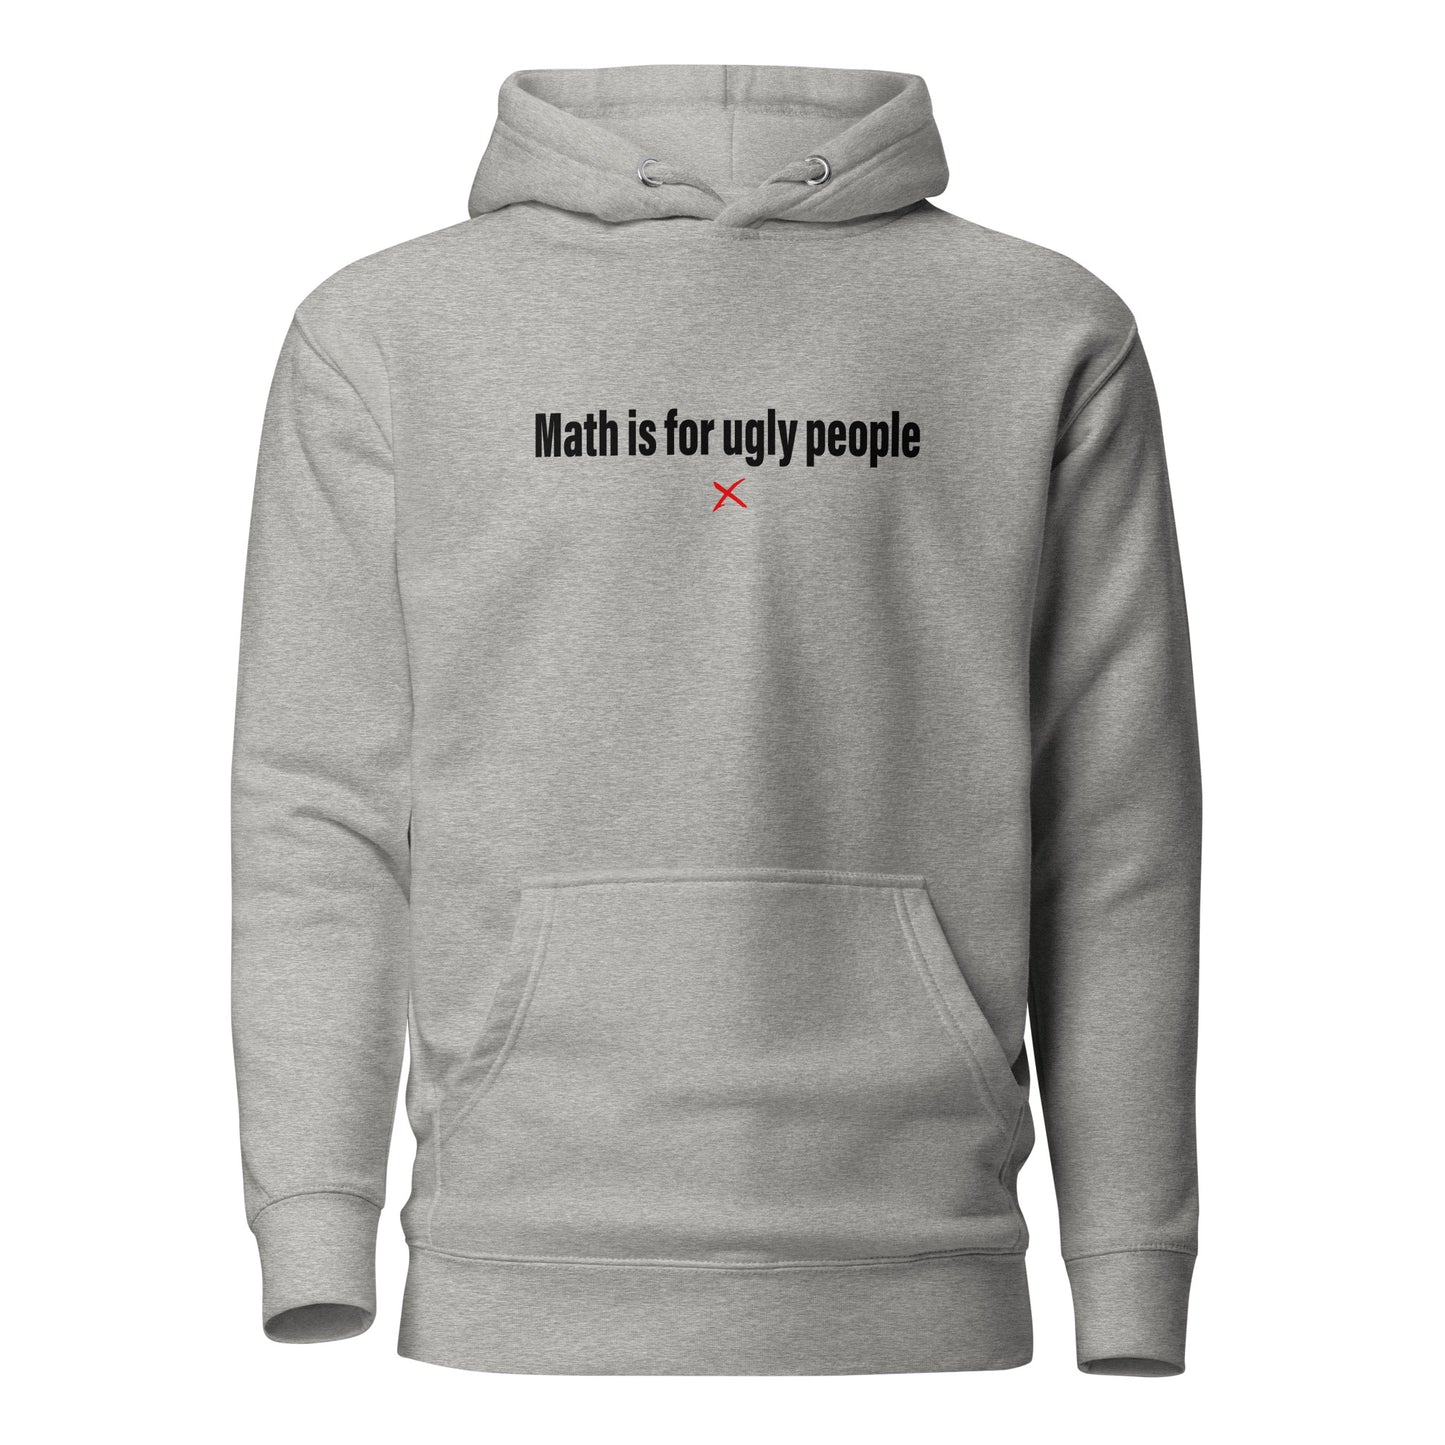 Math is for ugly people - Hoodie